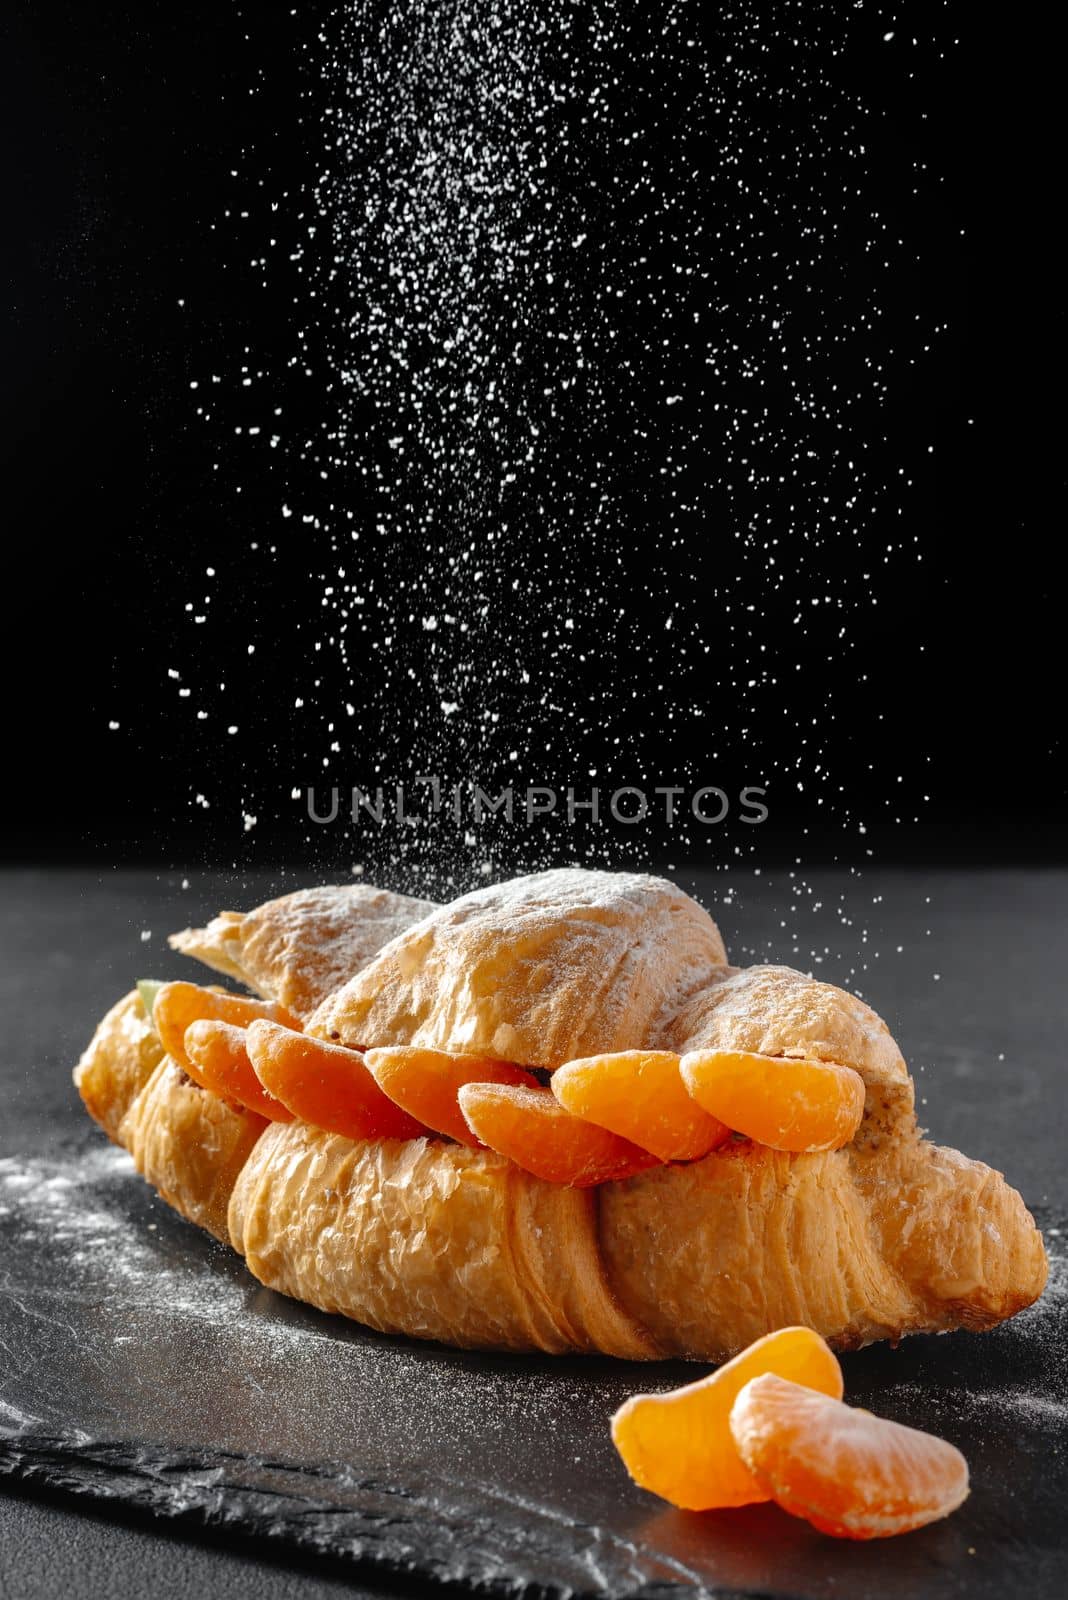 Sweet croissant sandwich with powdered sugar on a dark background. Baking and bakery concept.